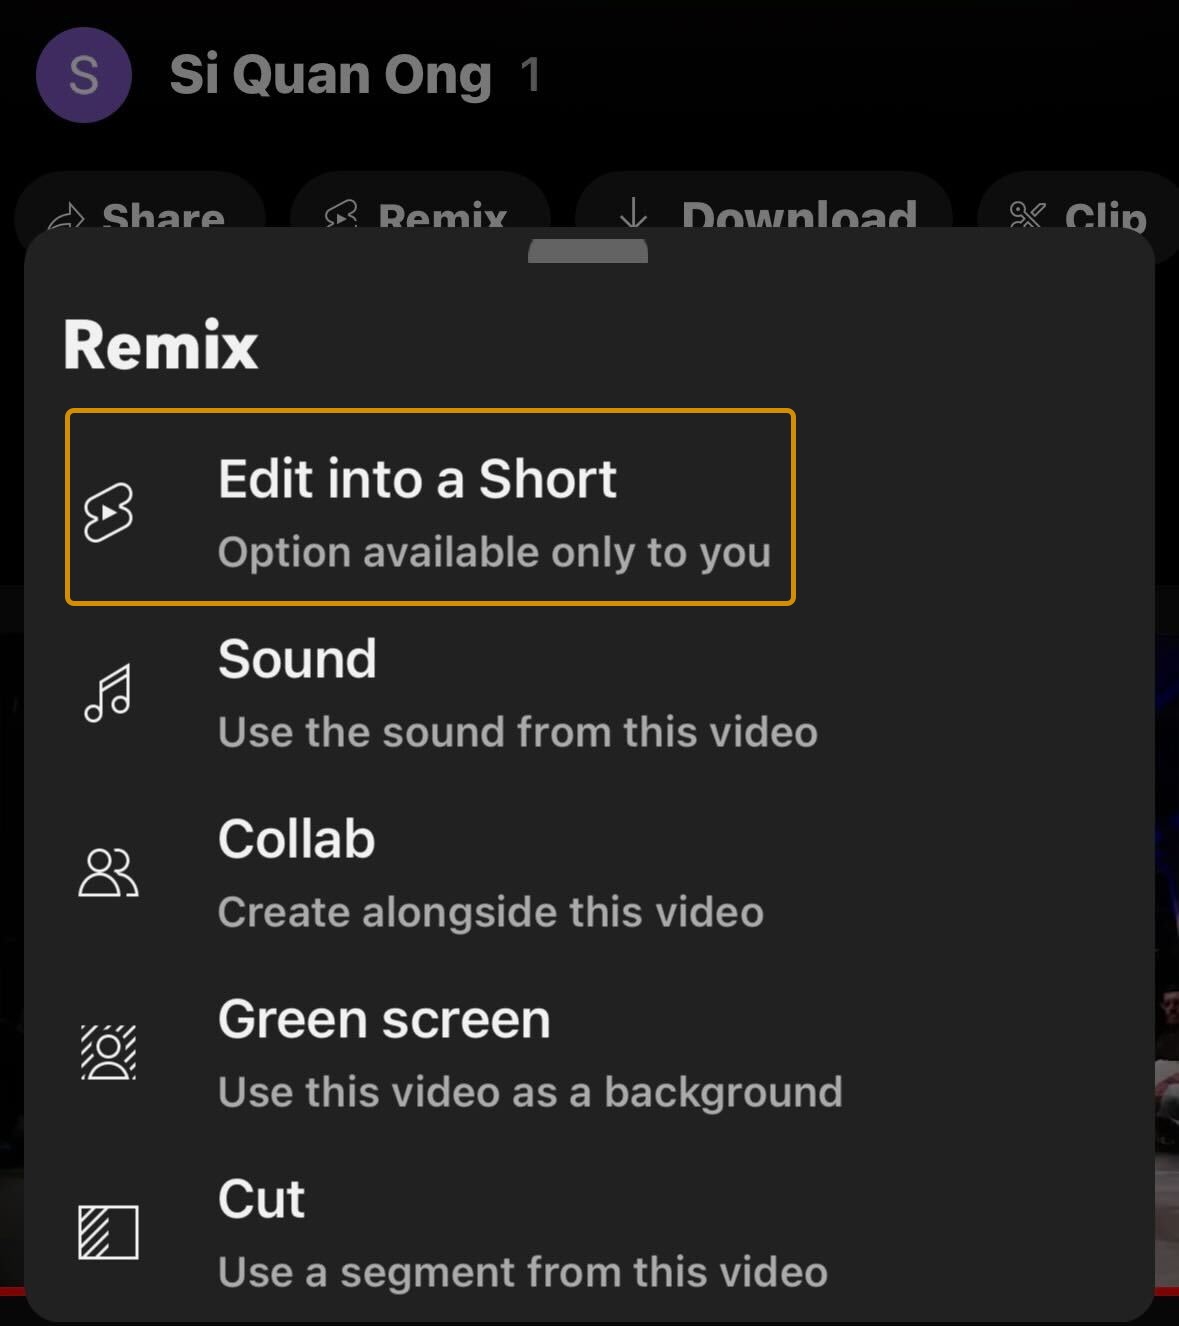 YouTube's Edit into a short feature